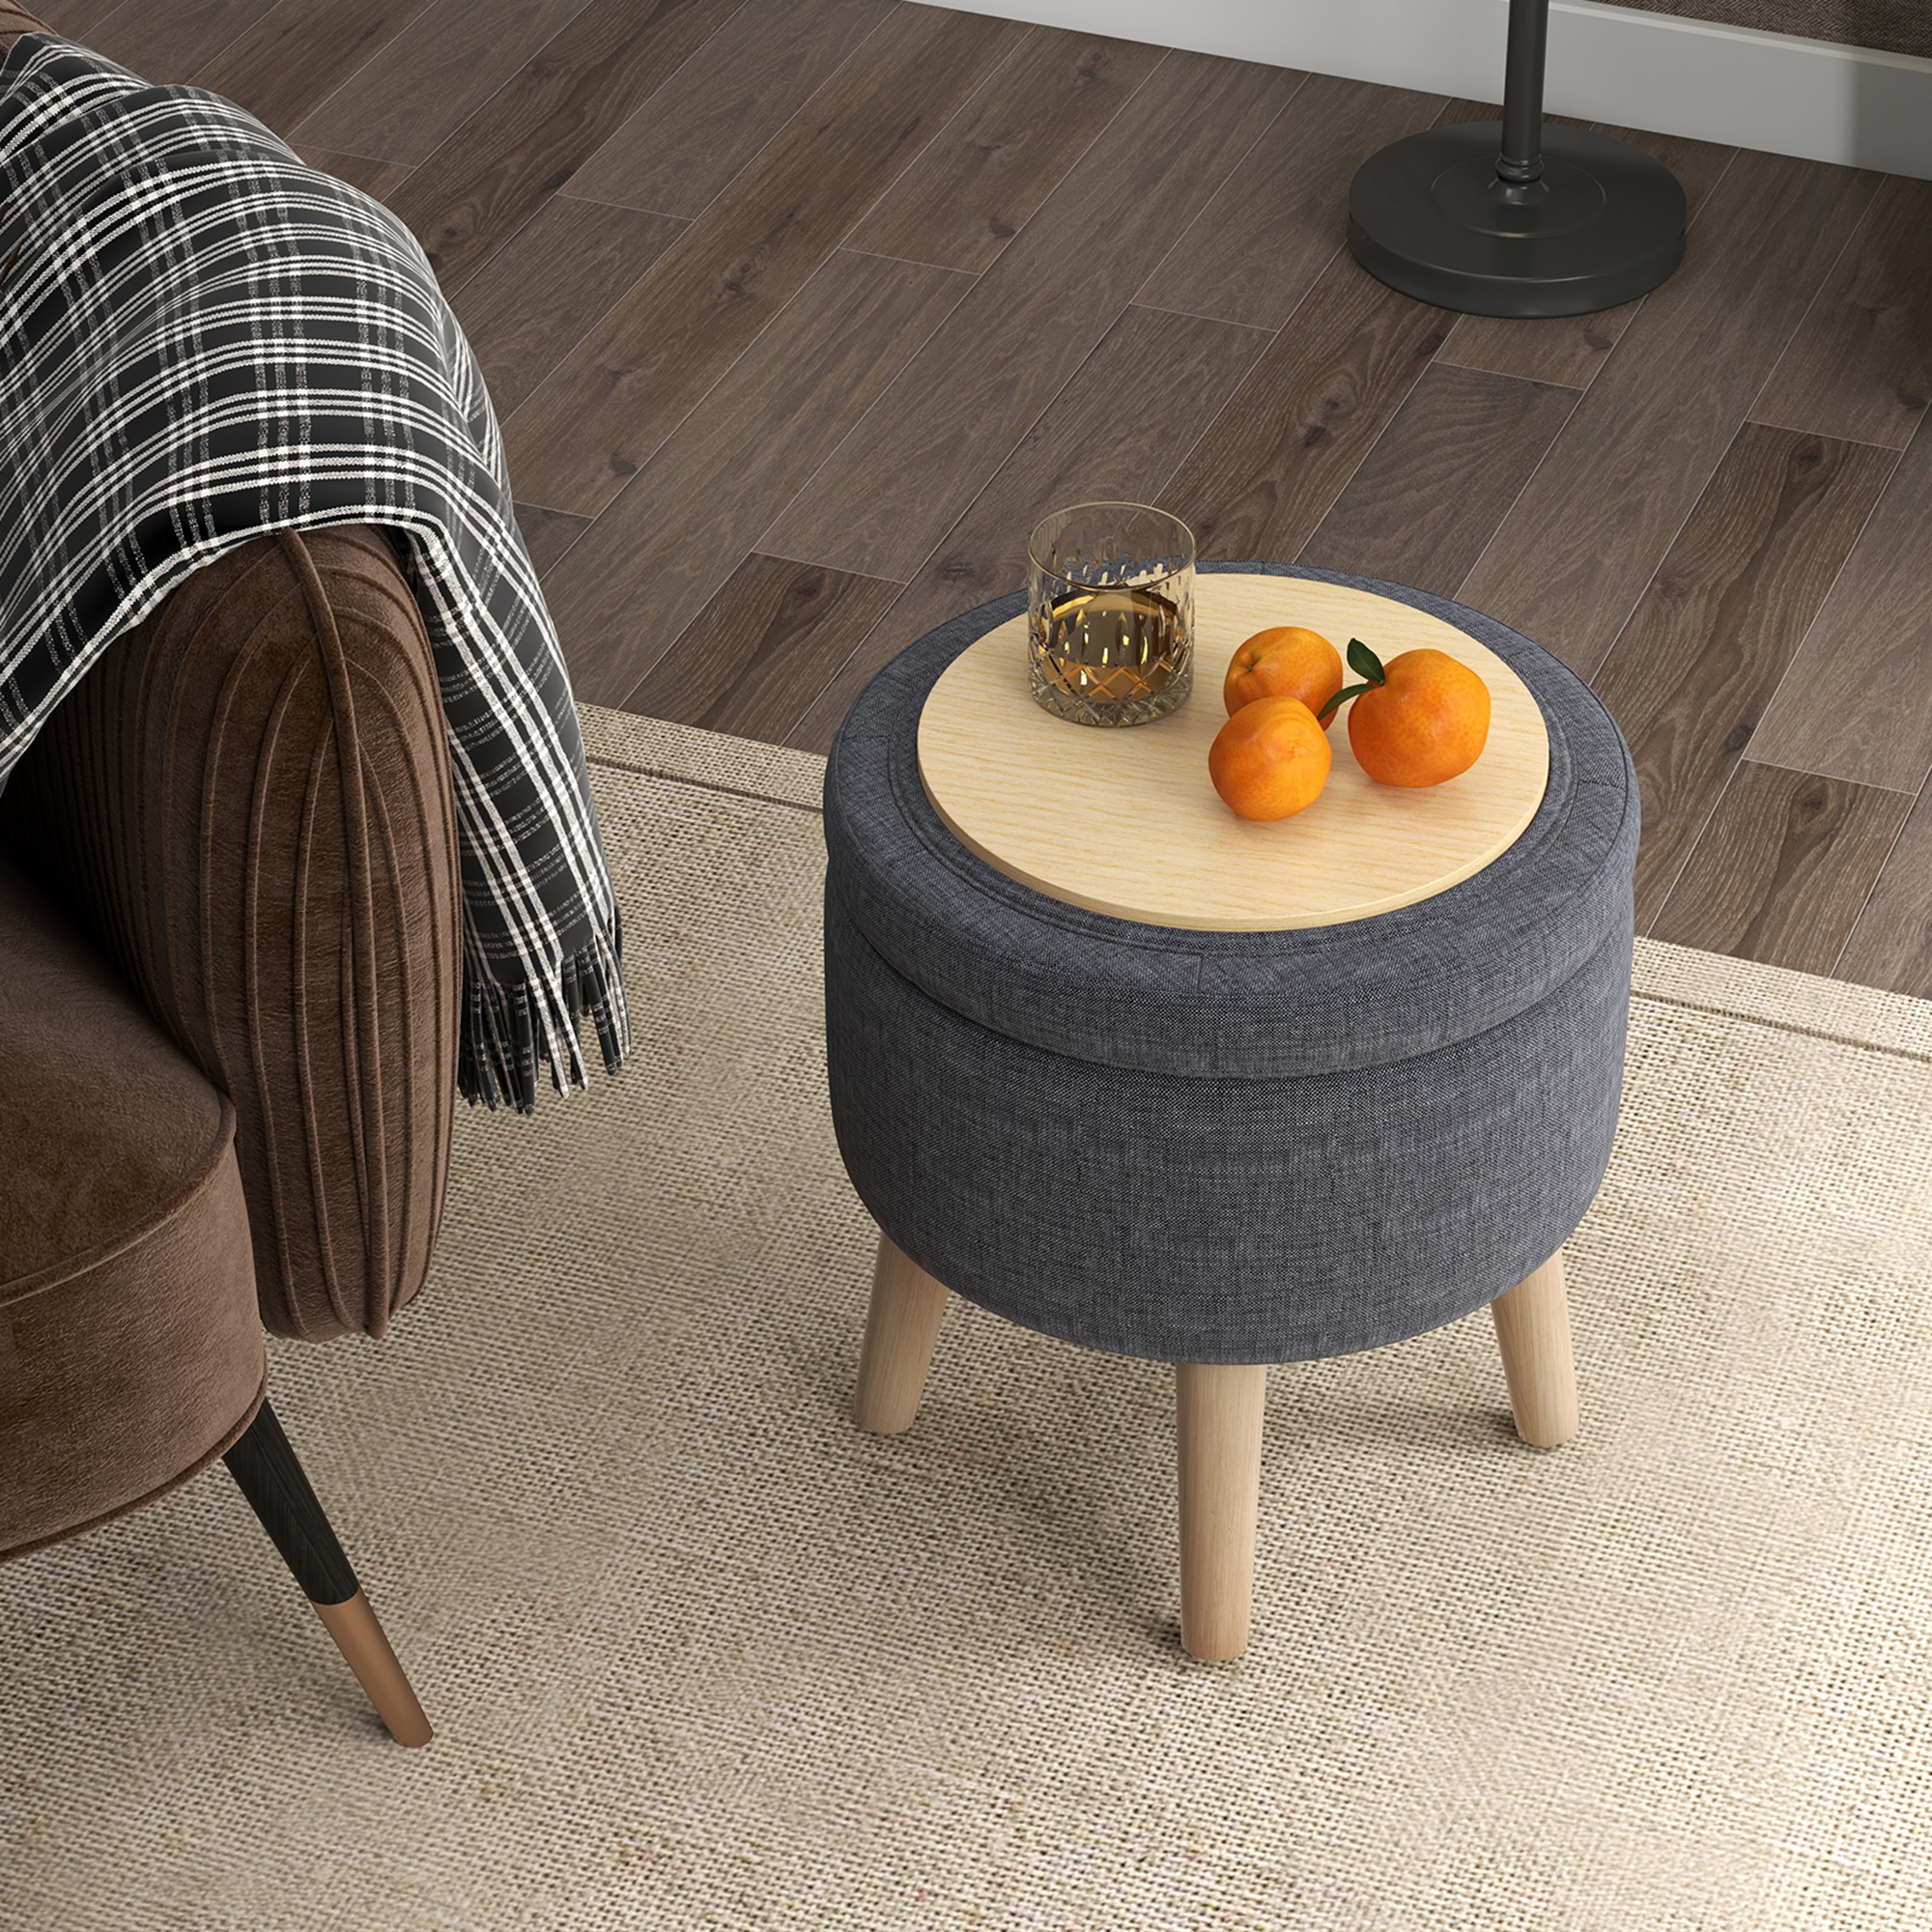 Costway Round Storage Ottoman Accent Storage Footstool with Tray for Living Room Bedroom Grey - image 5 of 10